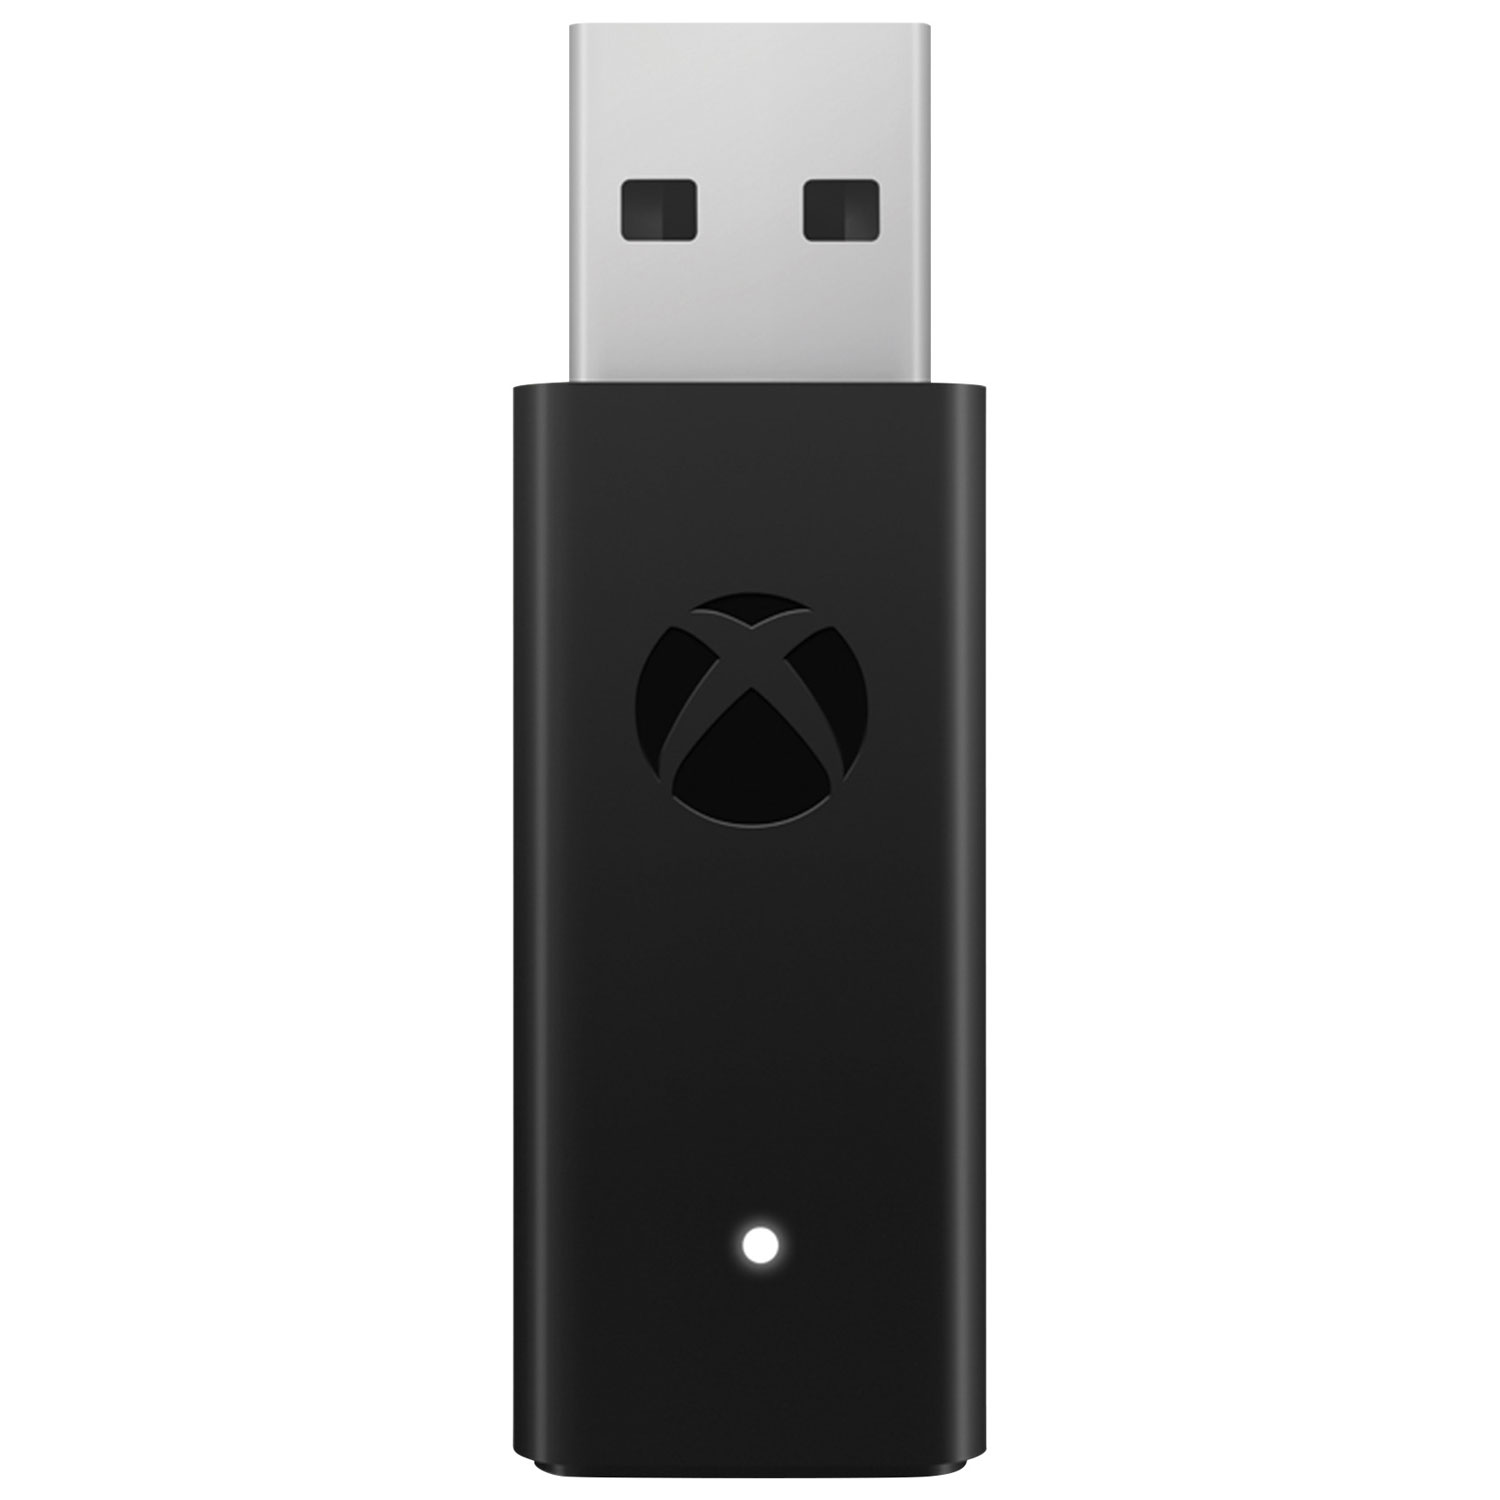 wifi dongle for xbox one